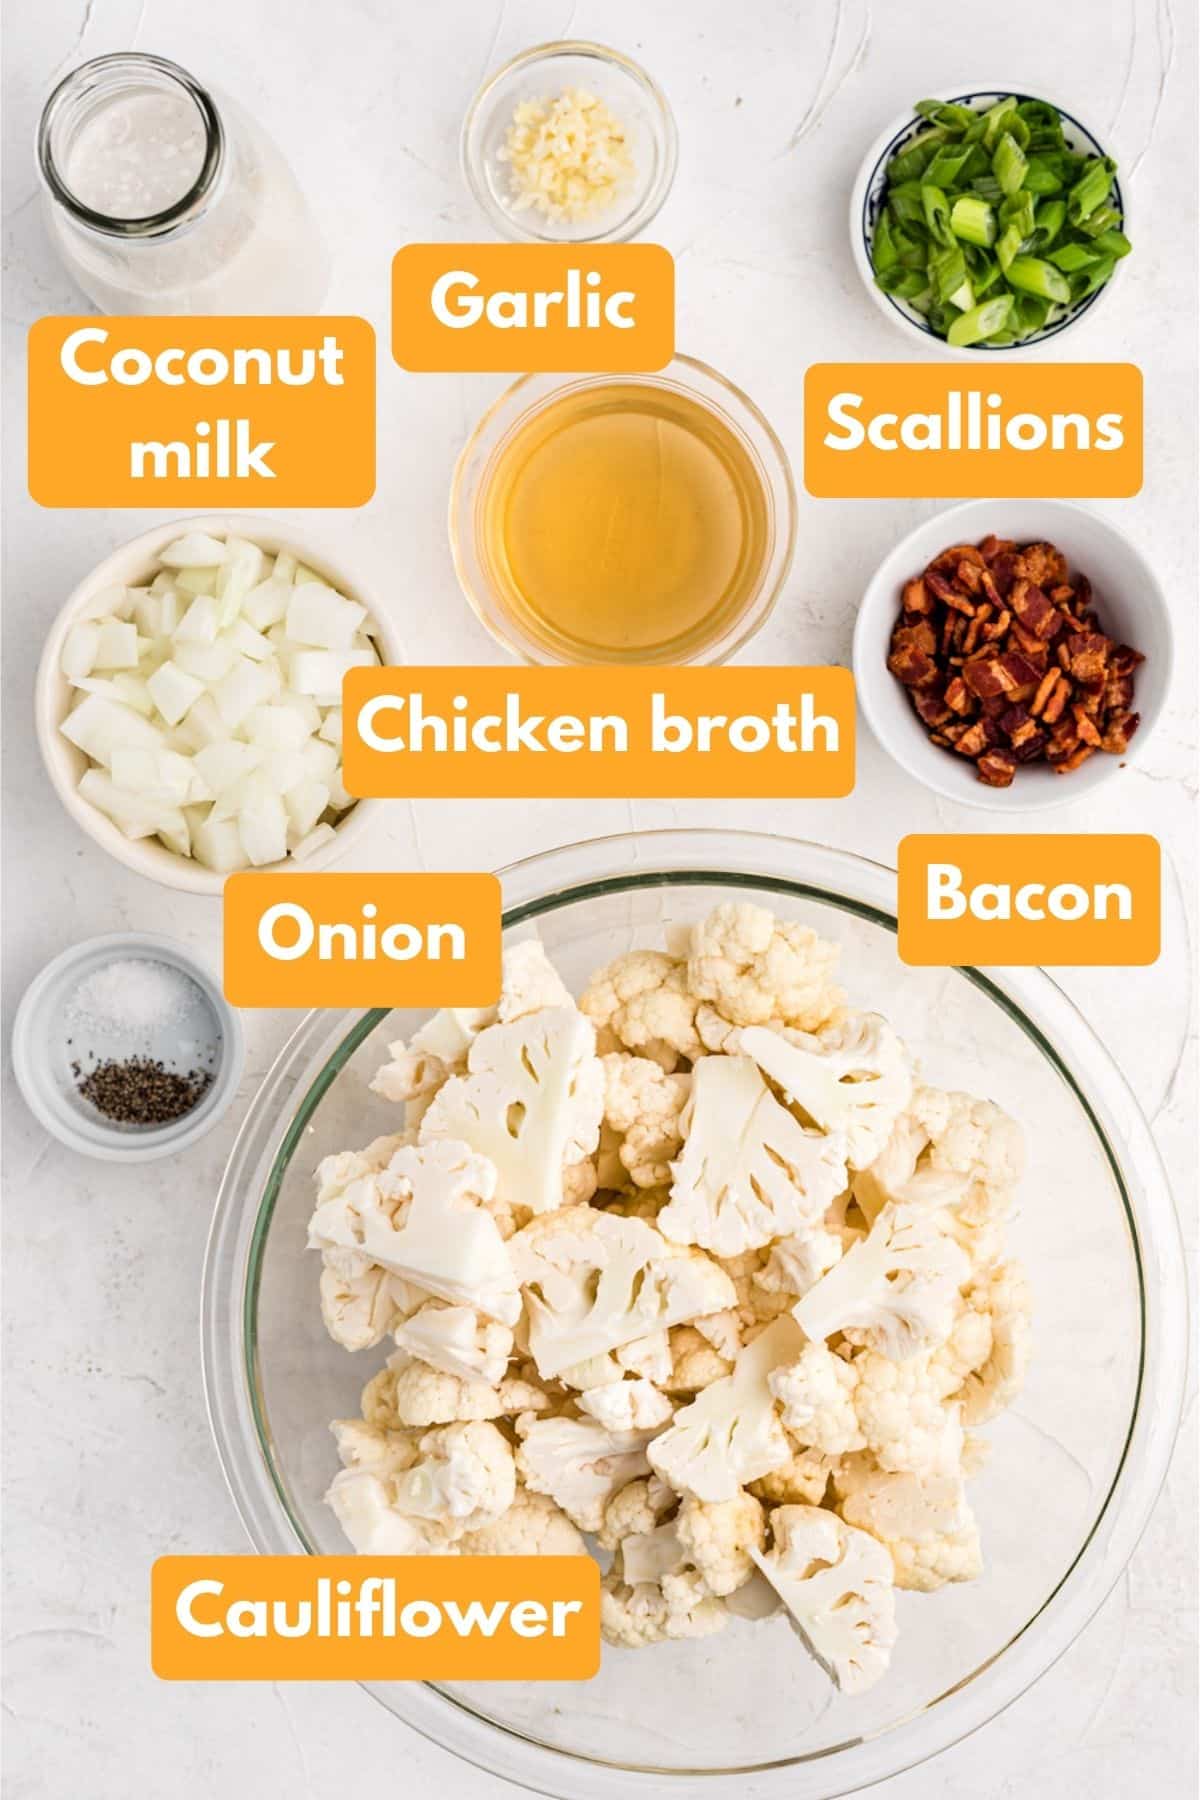 ingredients for cauliflower soup.